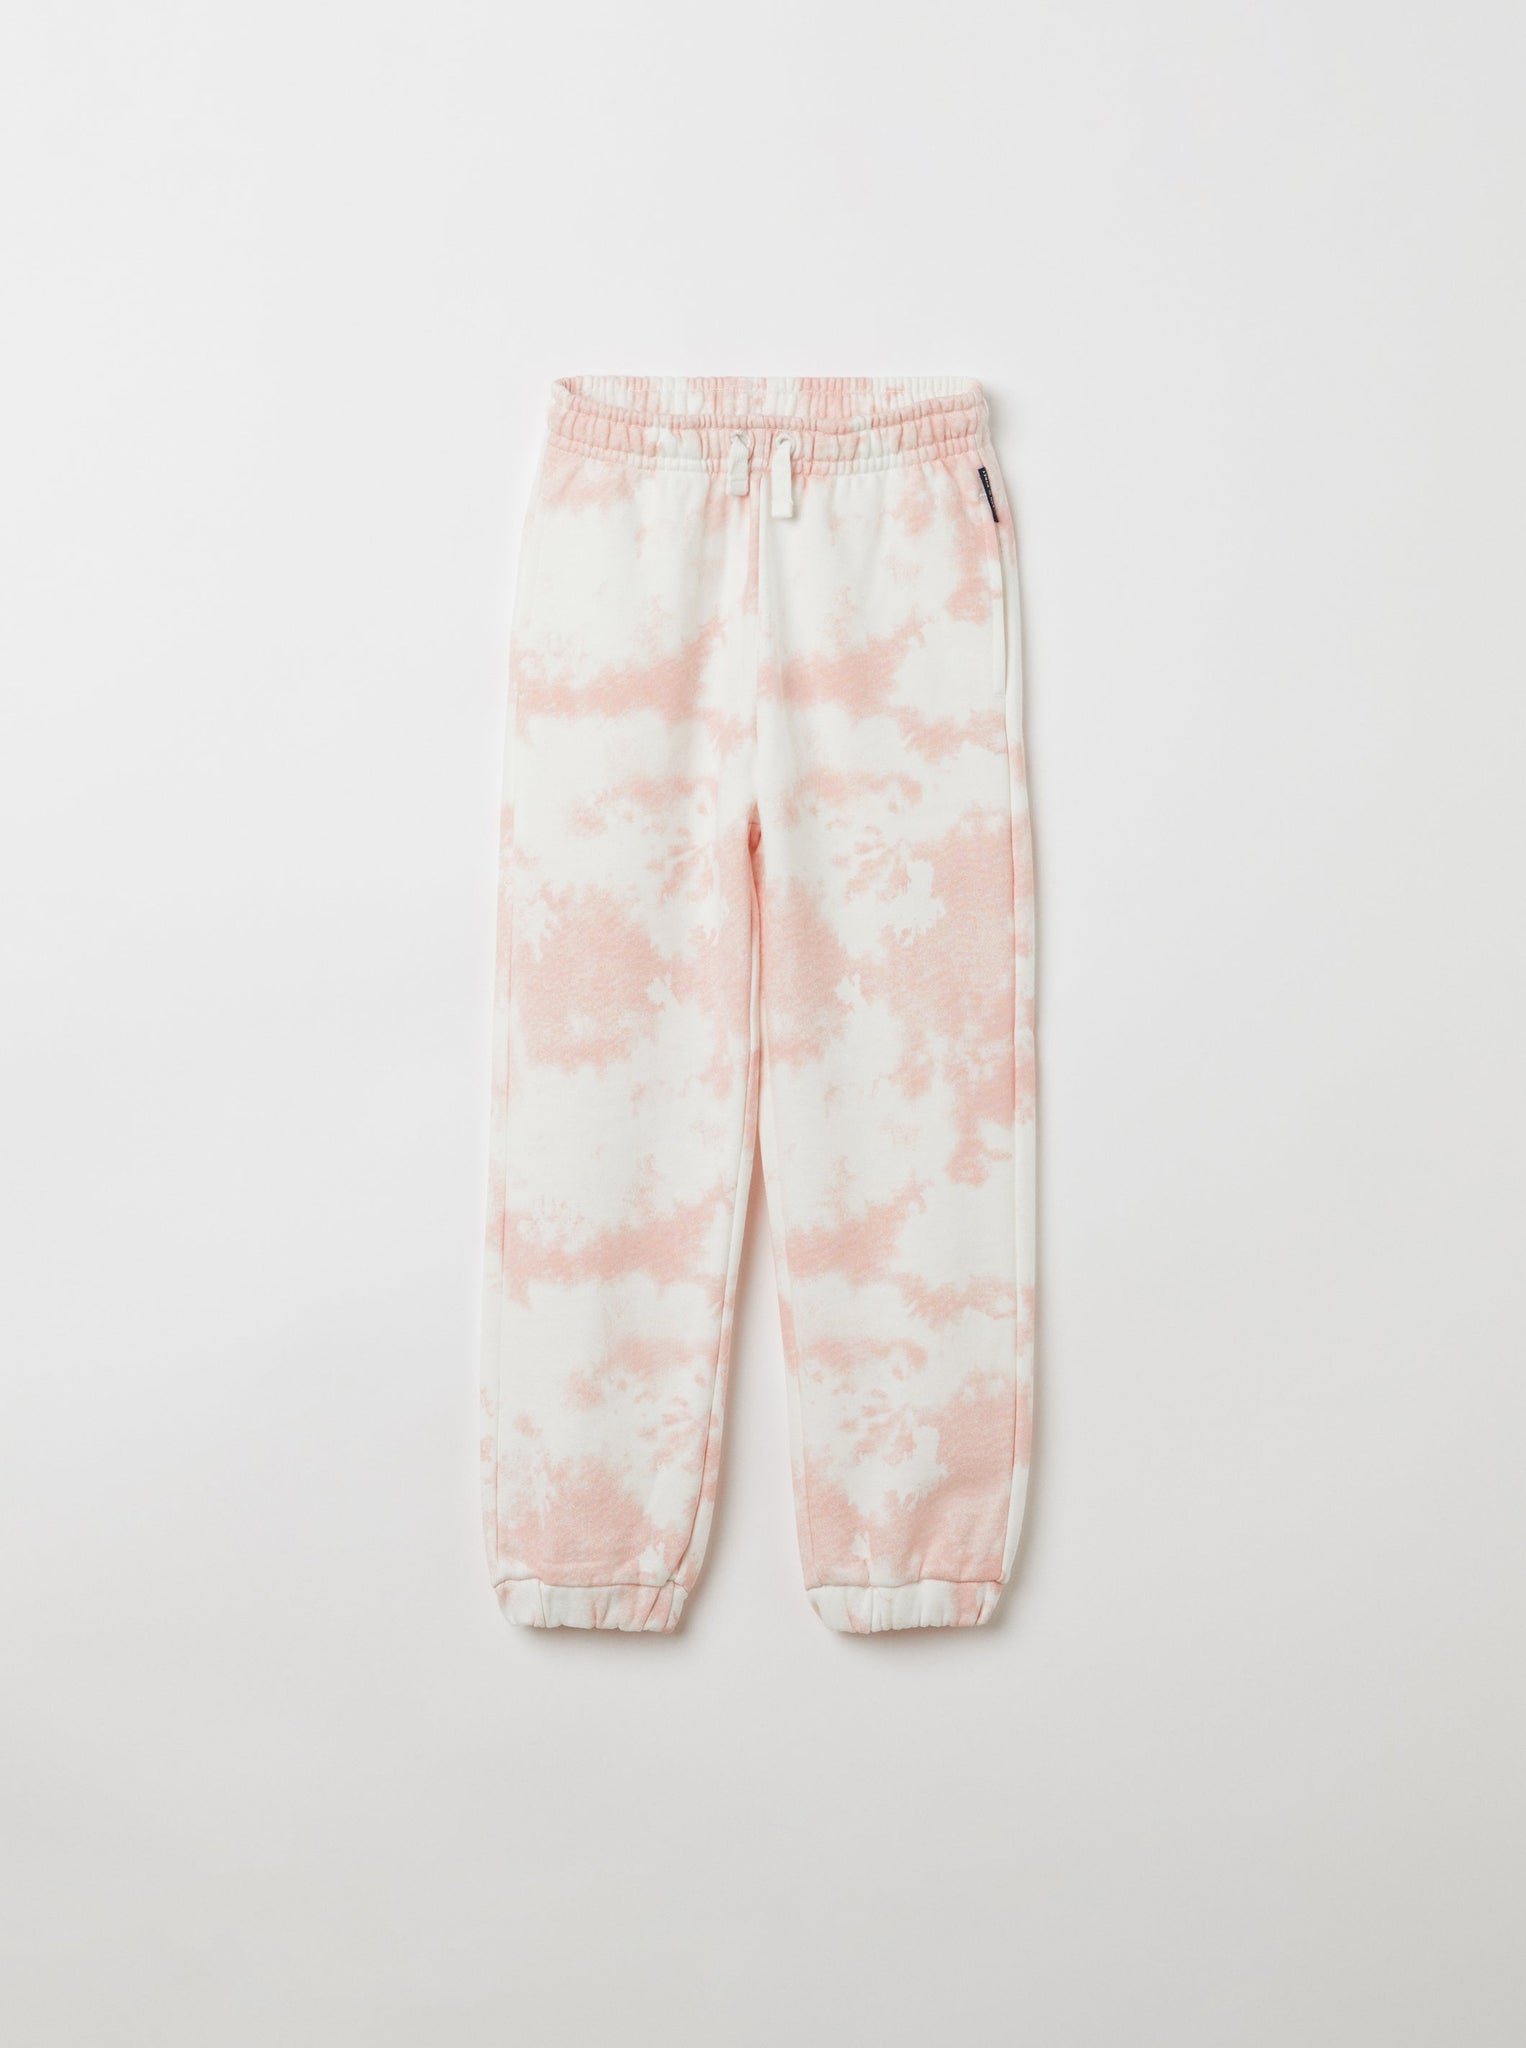 Tie-Dye Pink Kids Joggers from the Polarn O. Pyret kidswear collection. Ethically produced kids clothing.